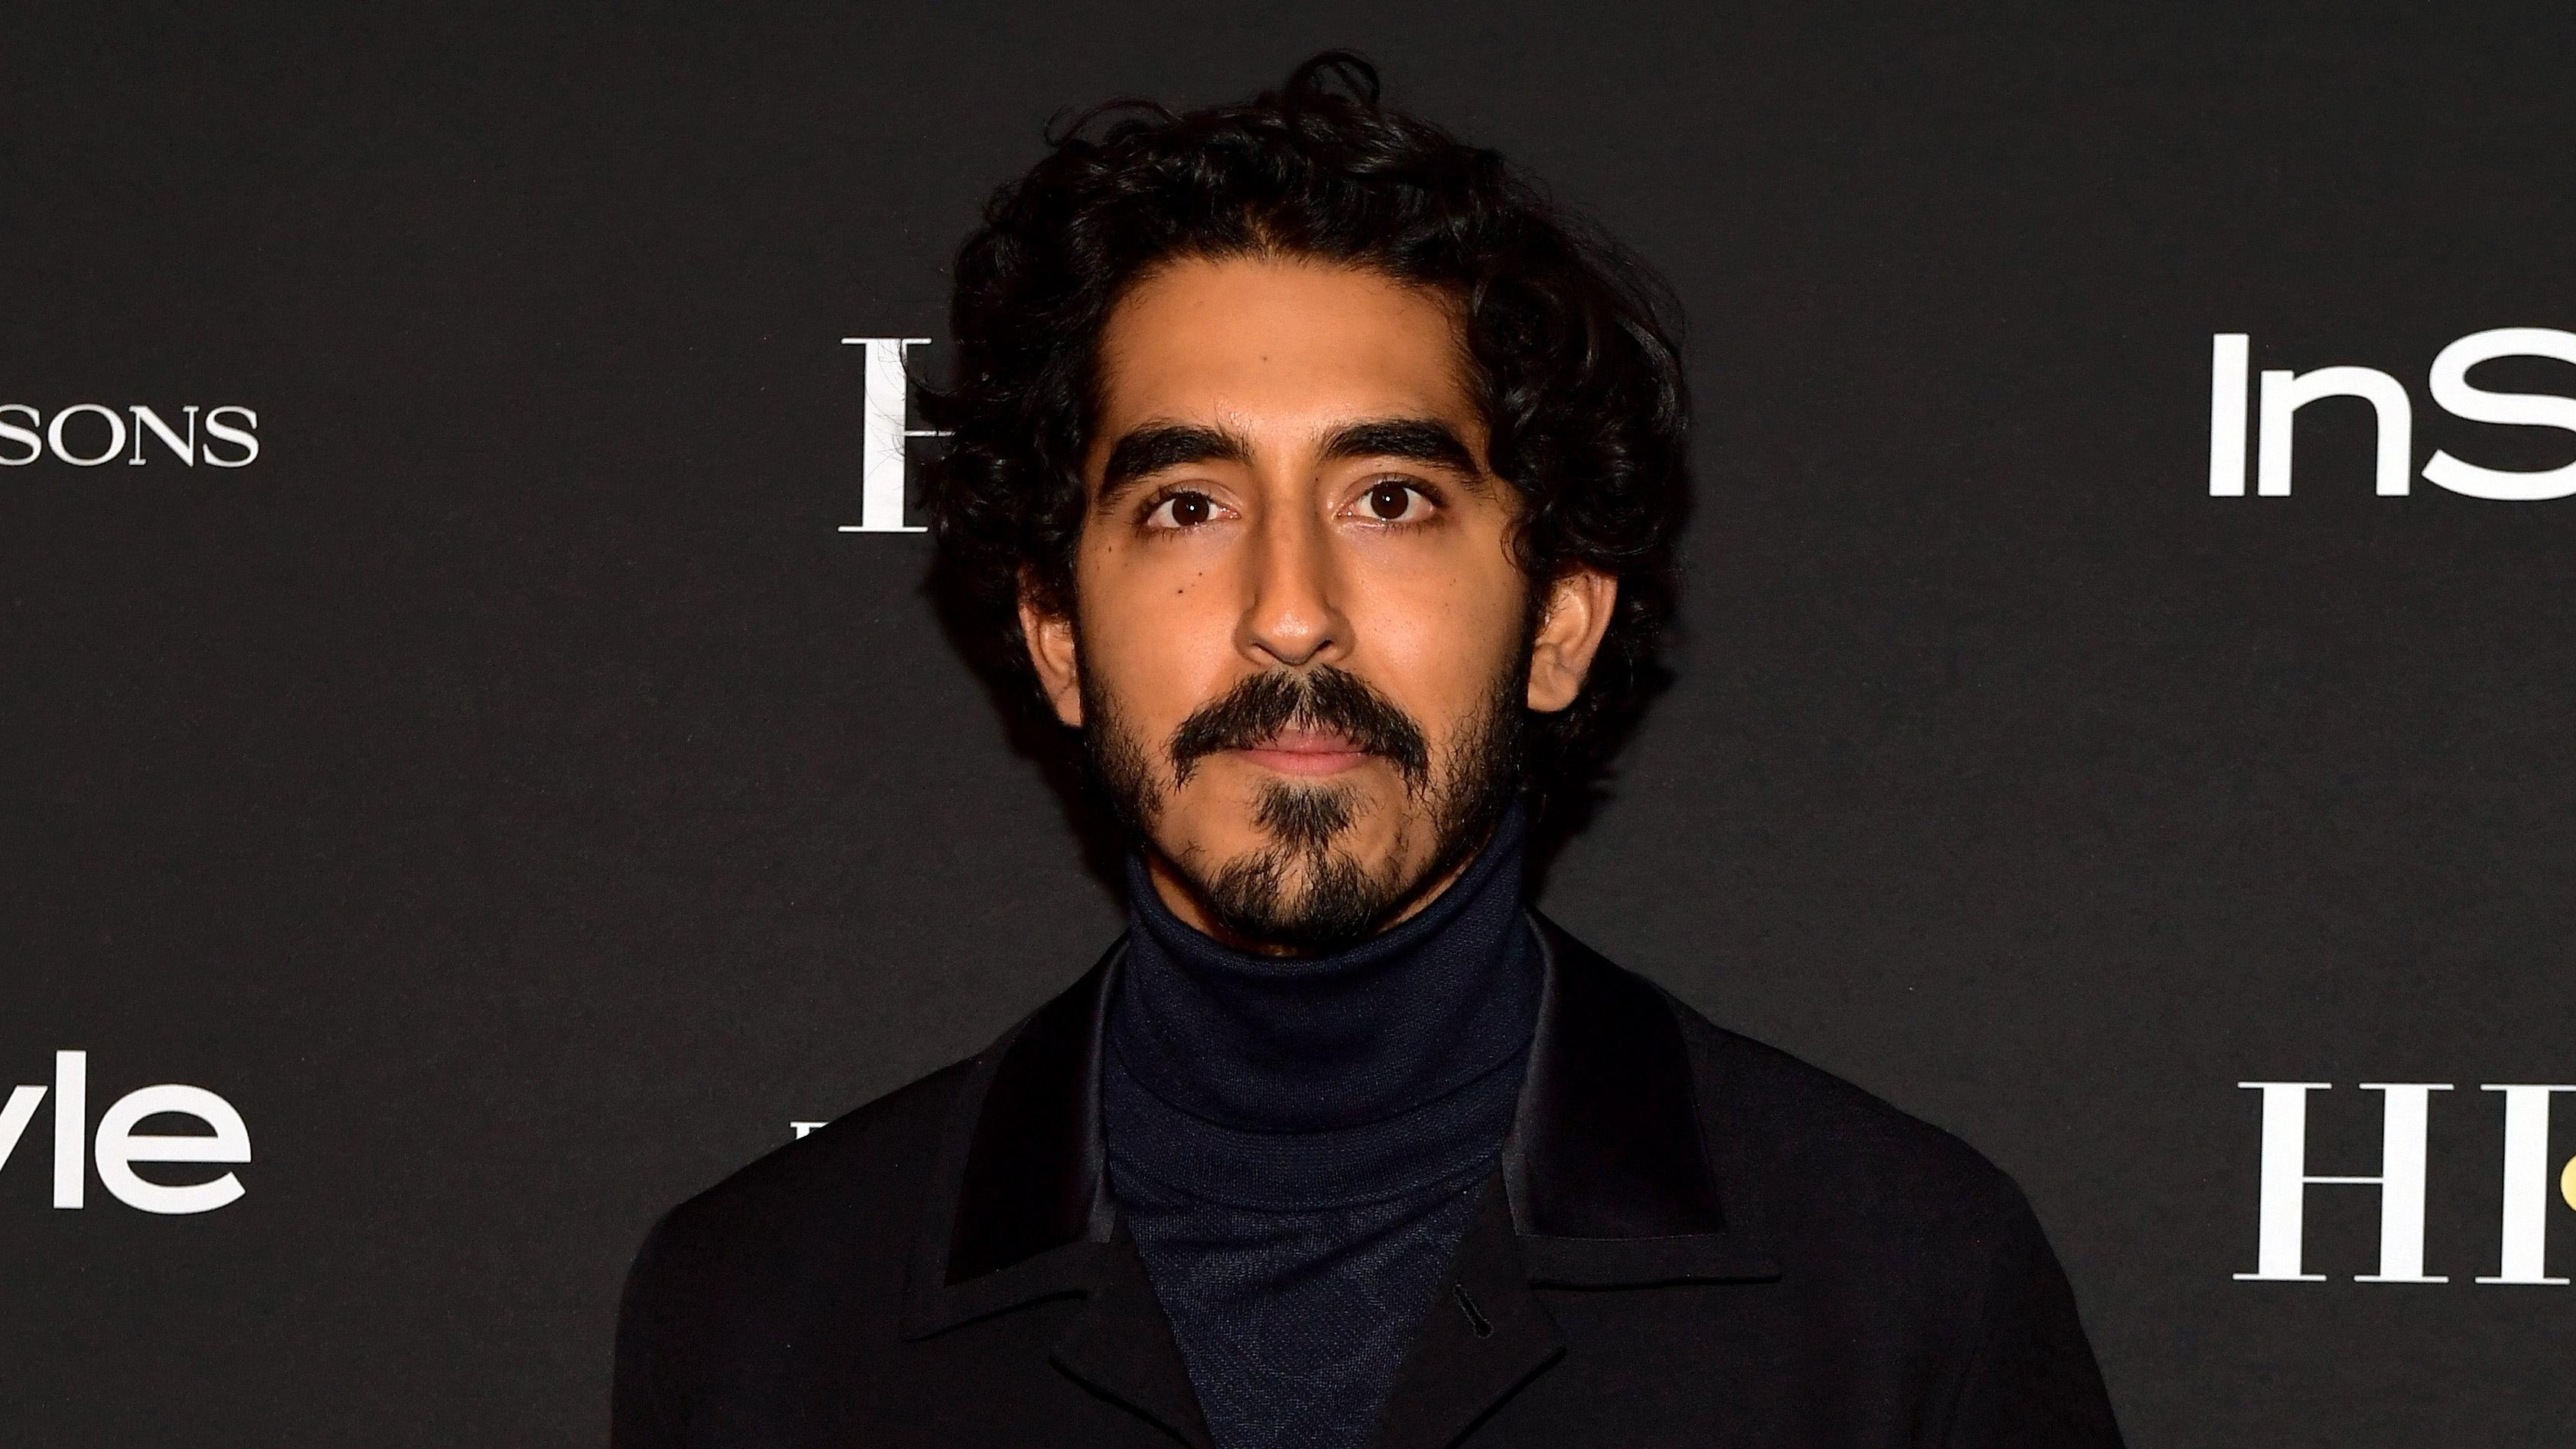 We could’ve had Dev Patel in the new Star Wars movies